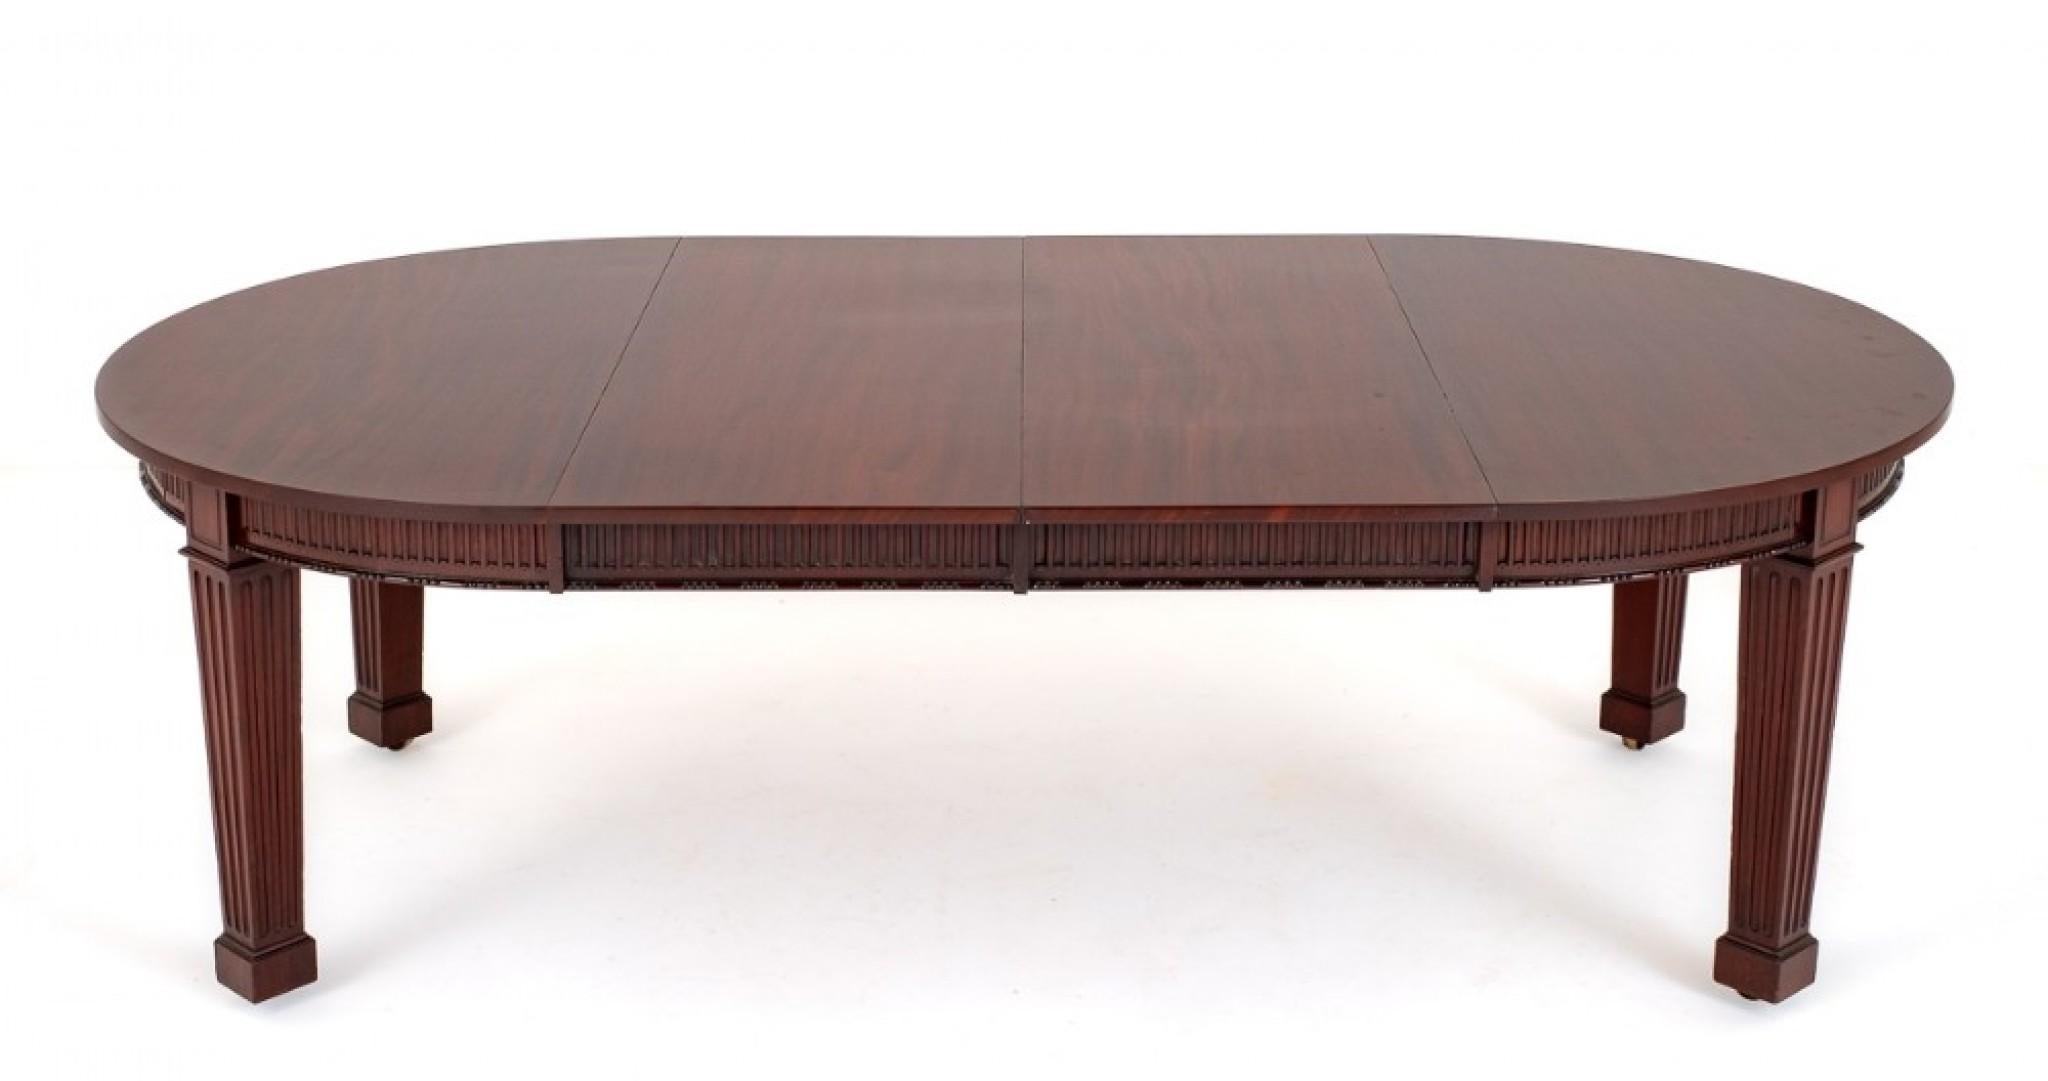 Period Victorian Dining Table Extending Mahogany 2 Leaf For Sale 1